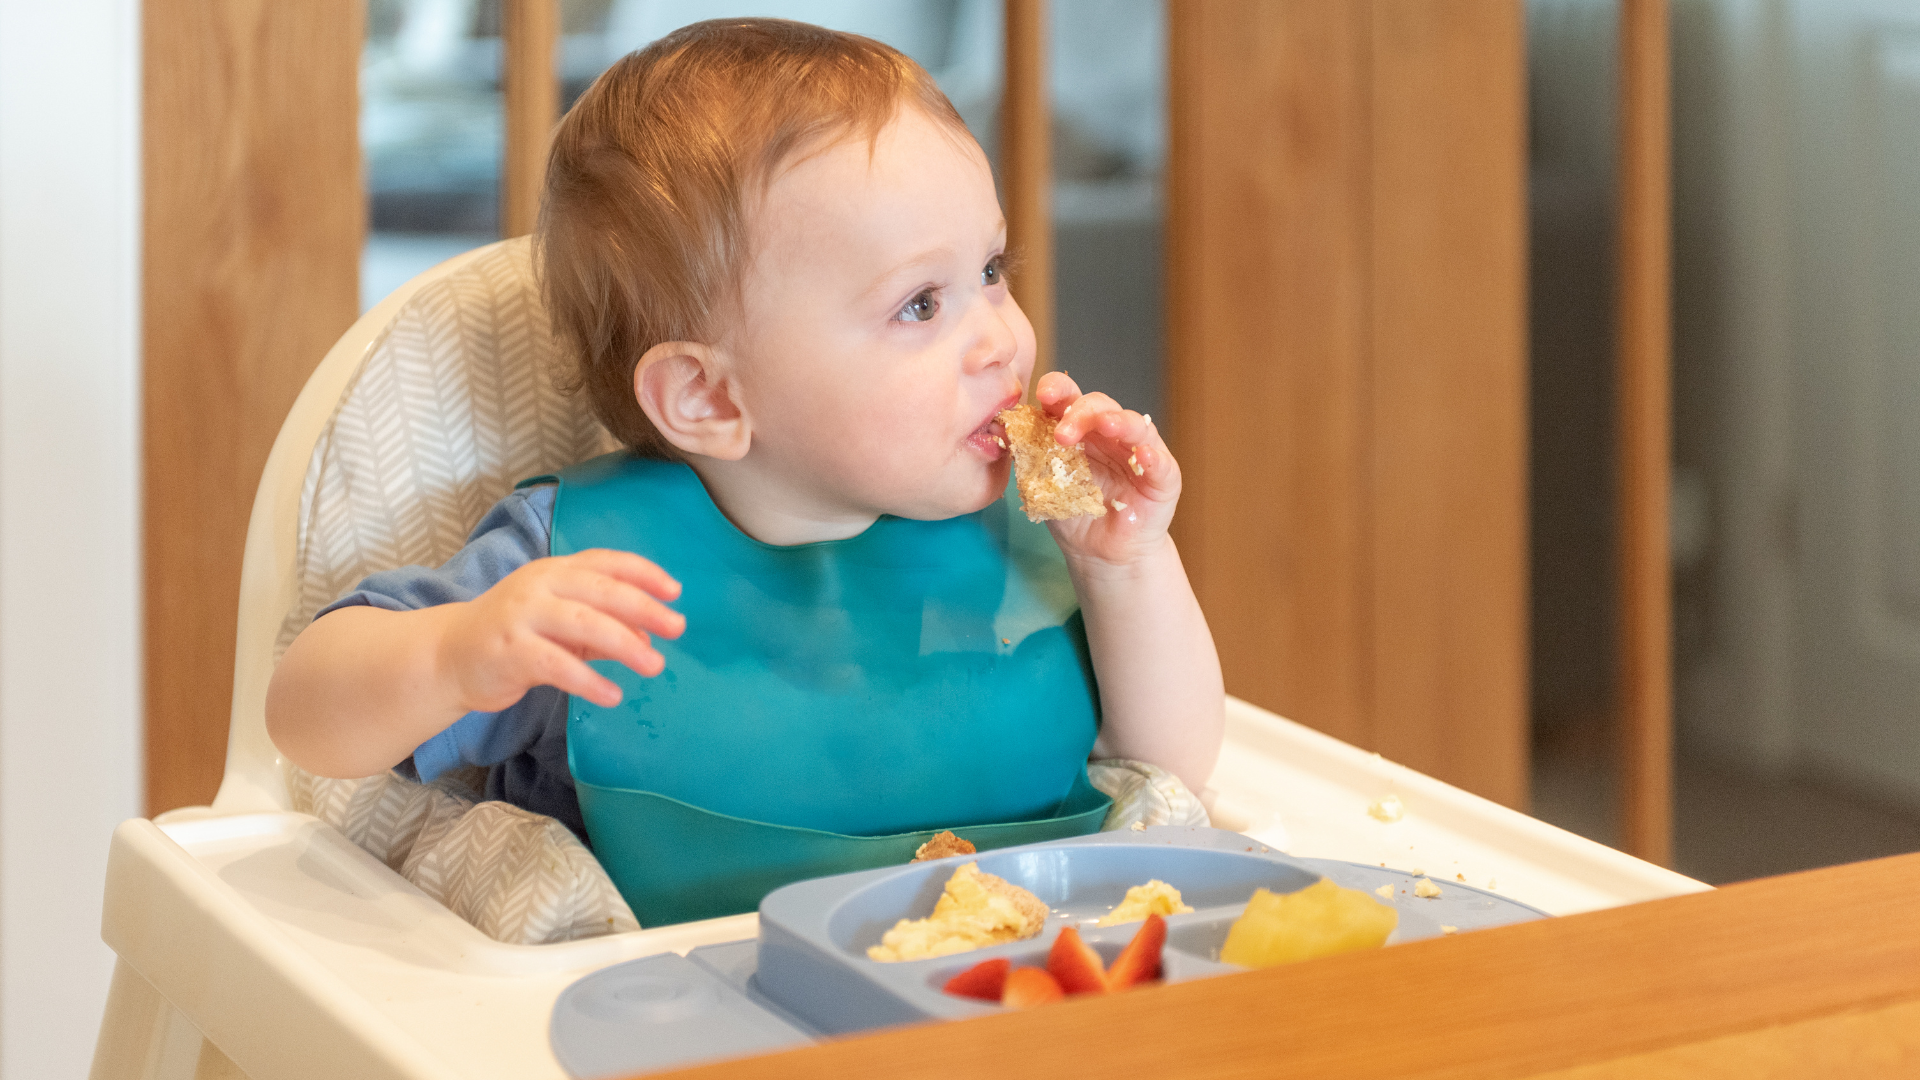 Baby experiencing Baby-Led Weaning by independently eating